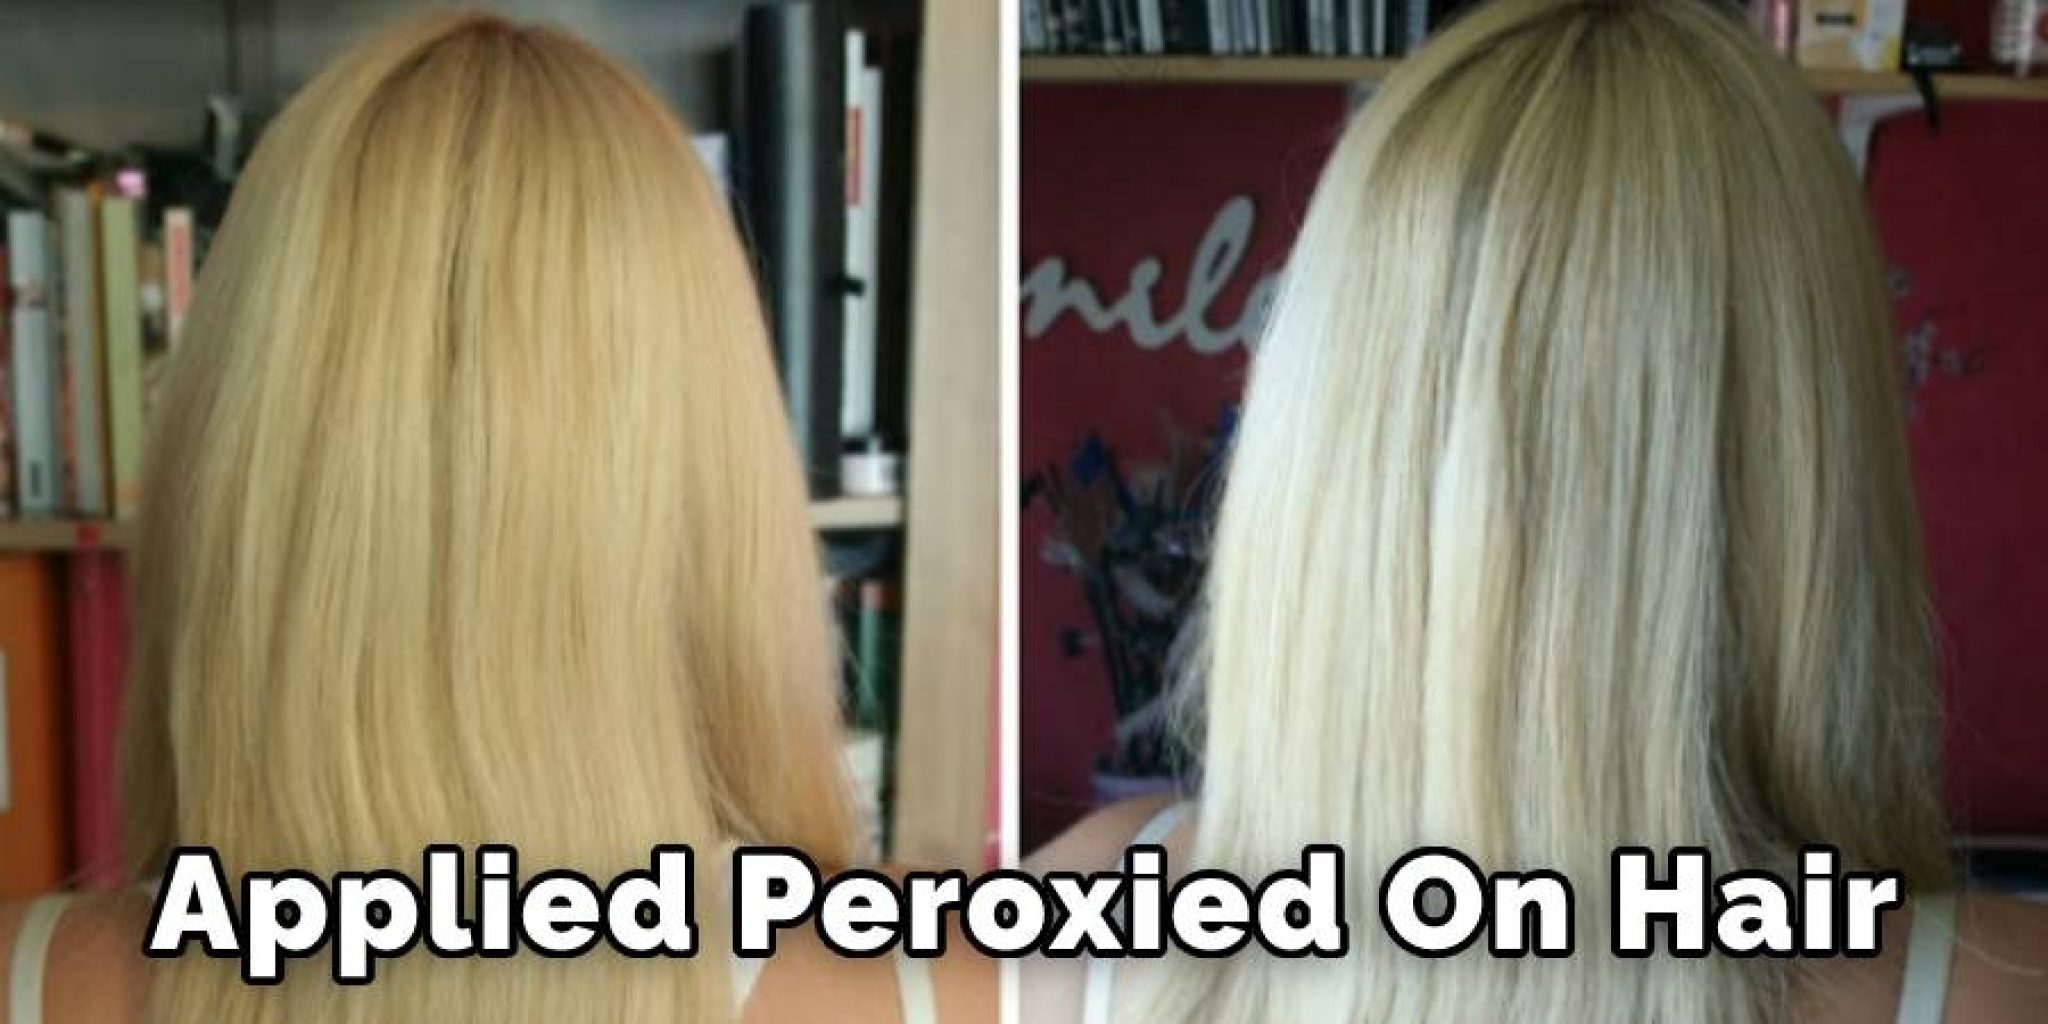 How to Prevent Bleached Hair from Turning Blue - wide 9